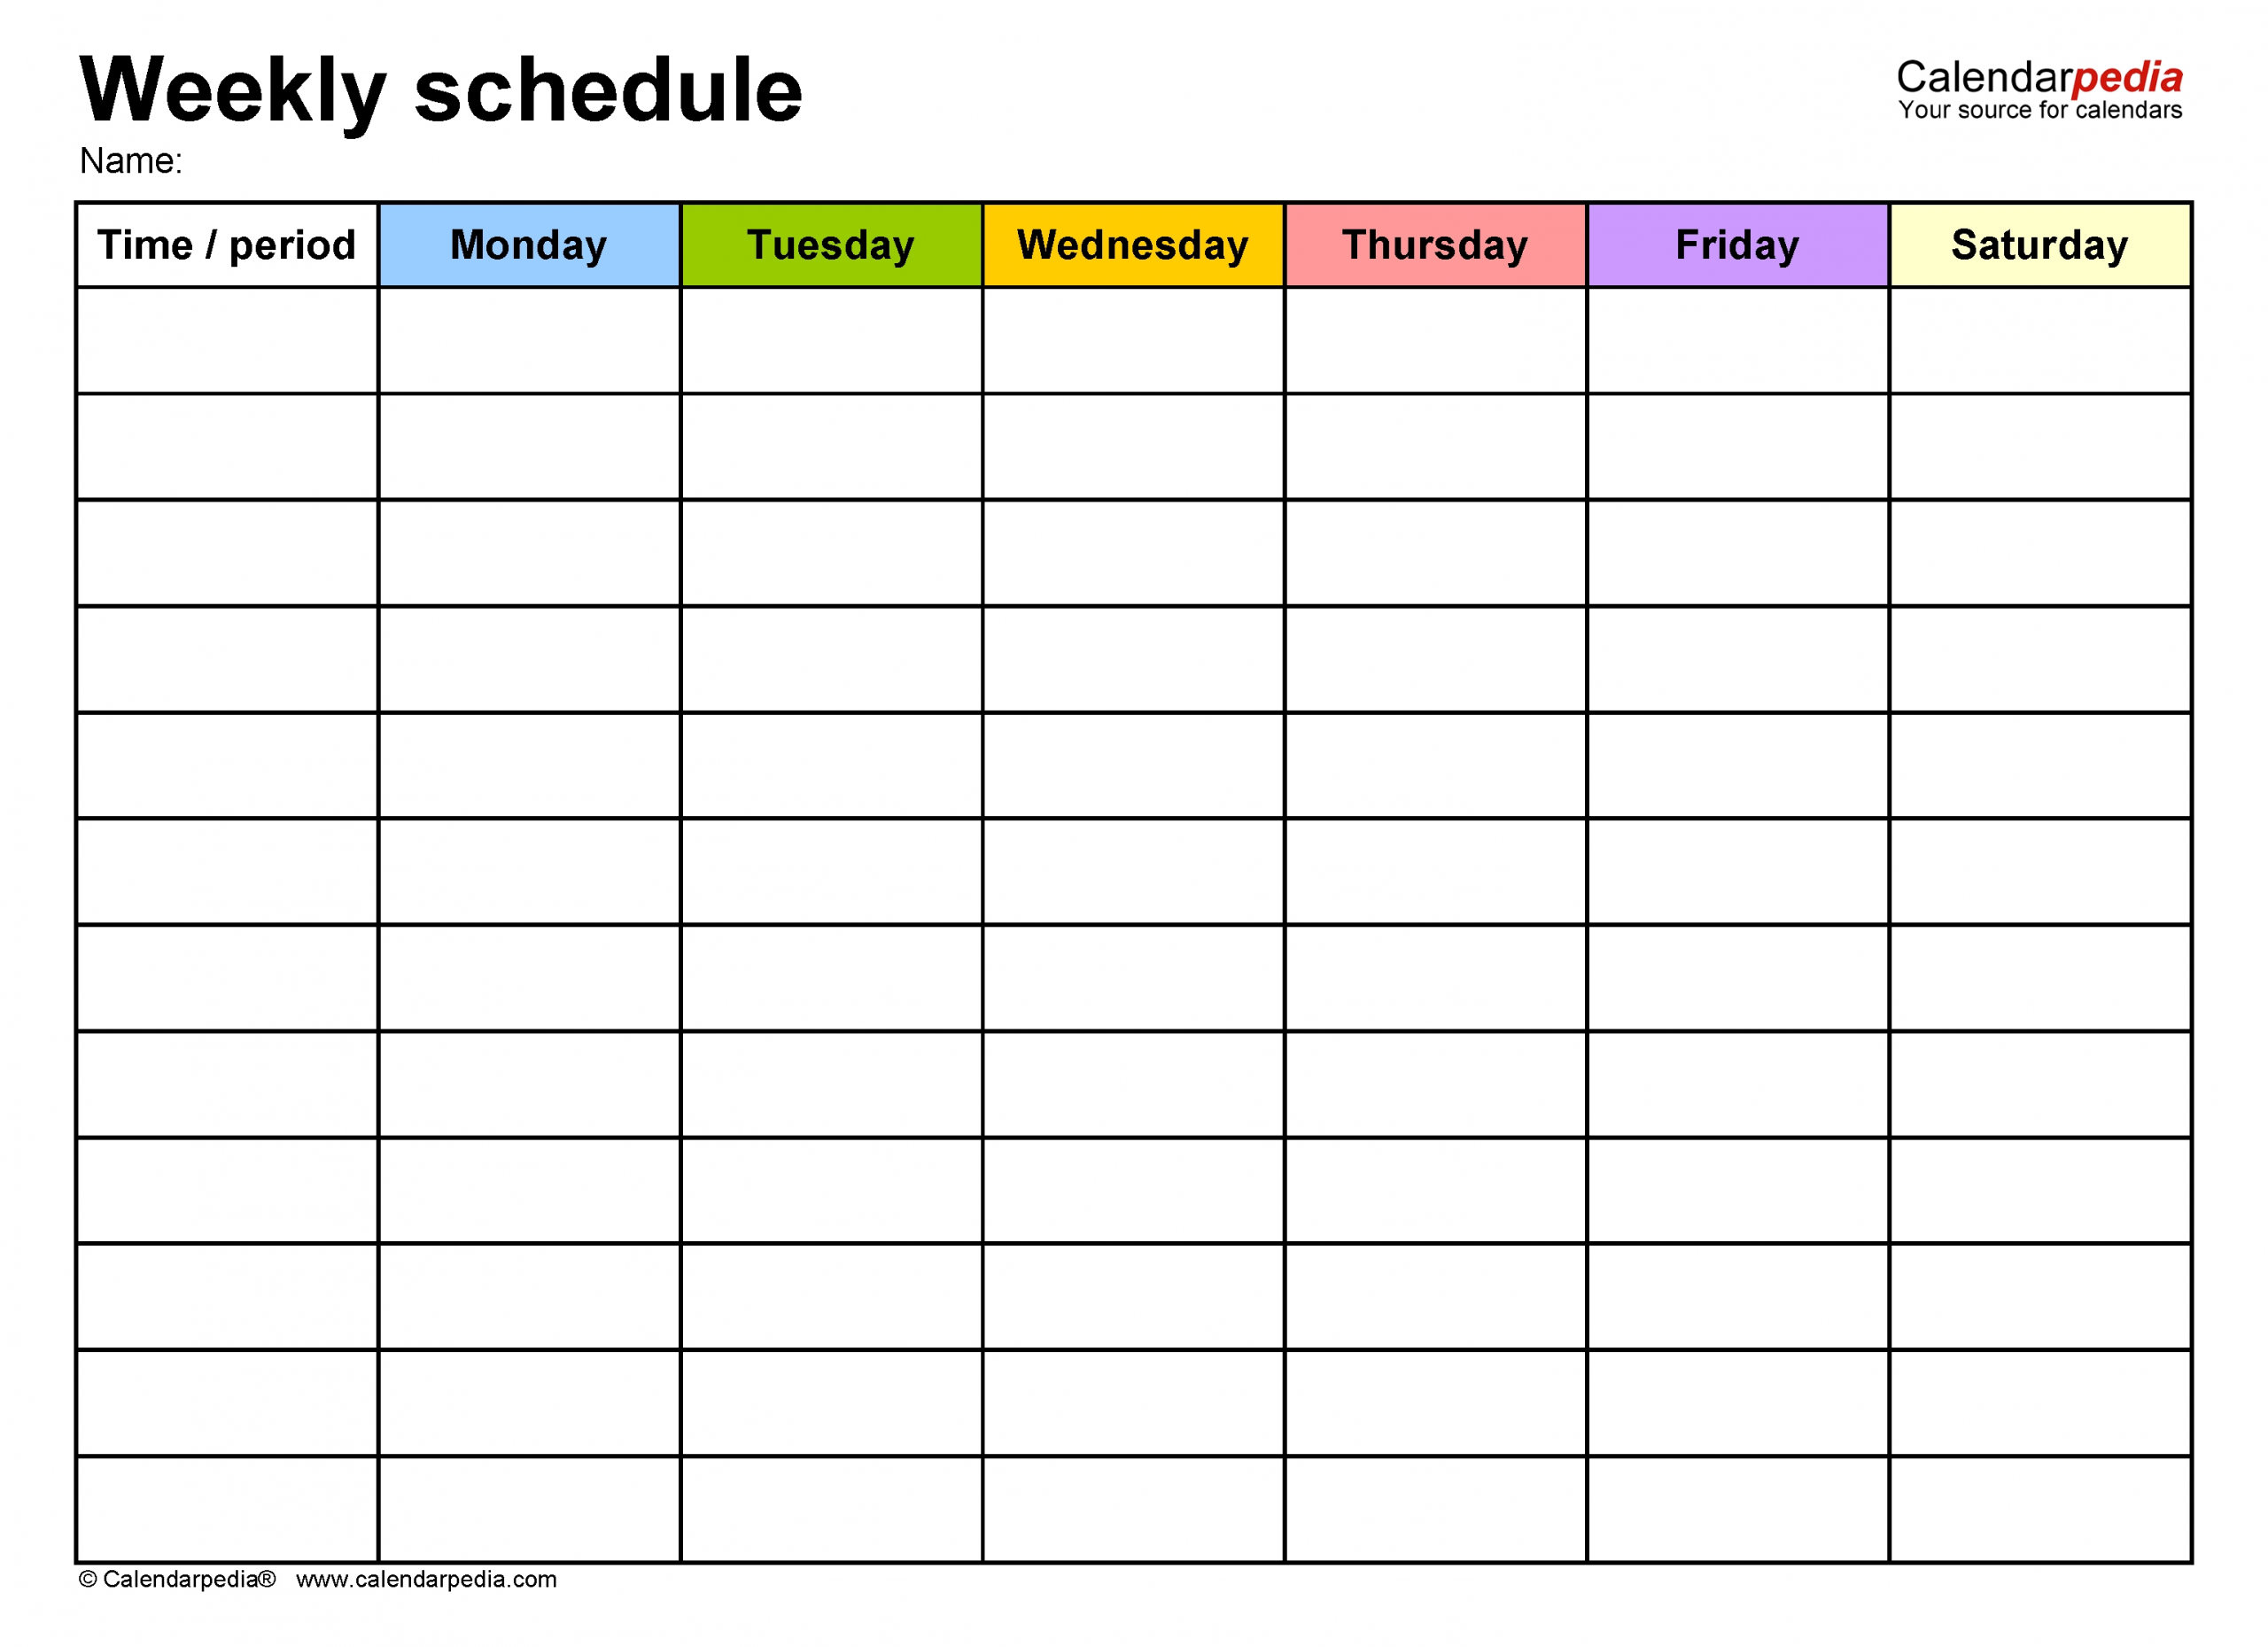 Free Weekly Schedule Templates For Word - 18 Templates with Monsay Through Friday Calneder With Times